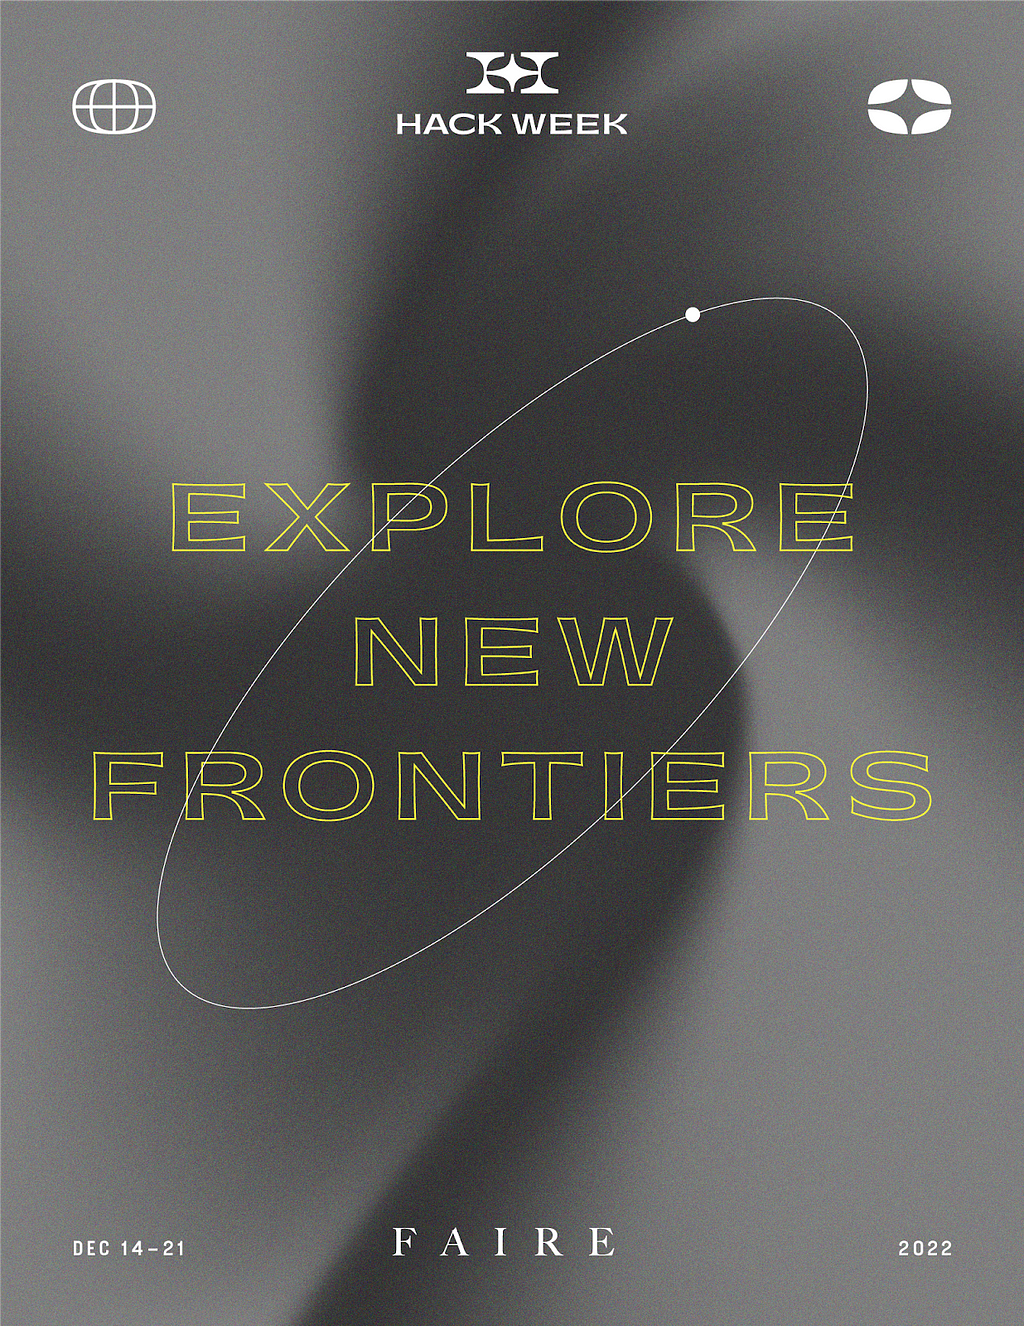 A banner for Faire’s 2022 Hack Week with the slogan “Explore new frontiers” on top of a spacey gray background. It features several stylized Hack Week logos.